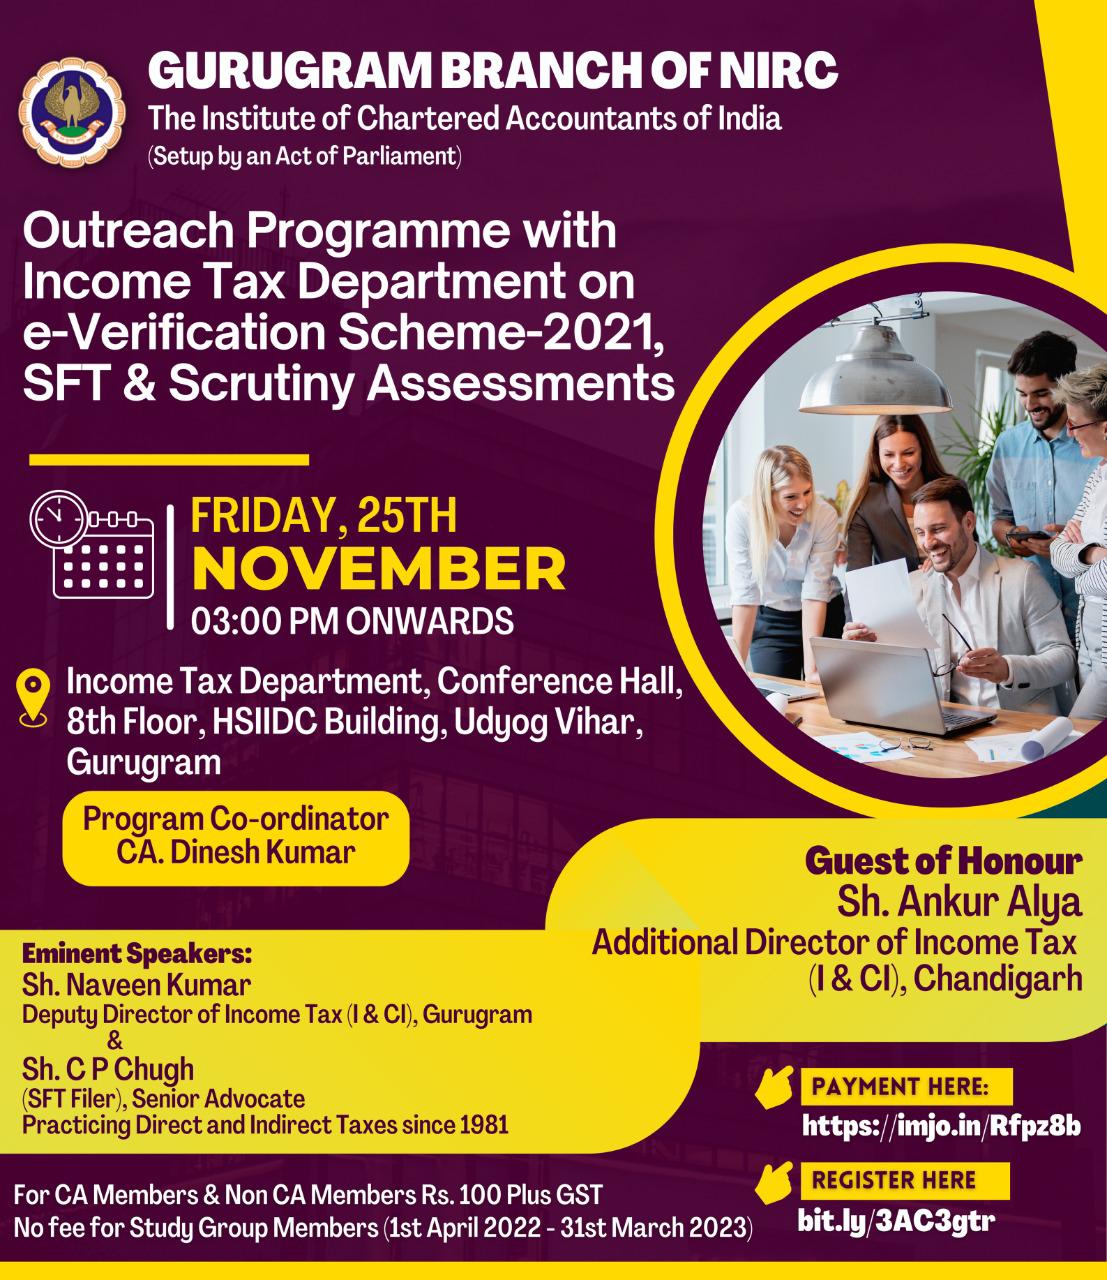 Outreach Programme with Income Tax Department on e-Verification Scheme-2021, SFT & Scrutiny Assessments